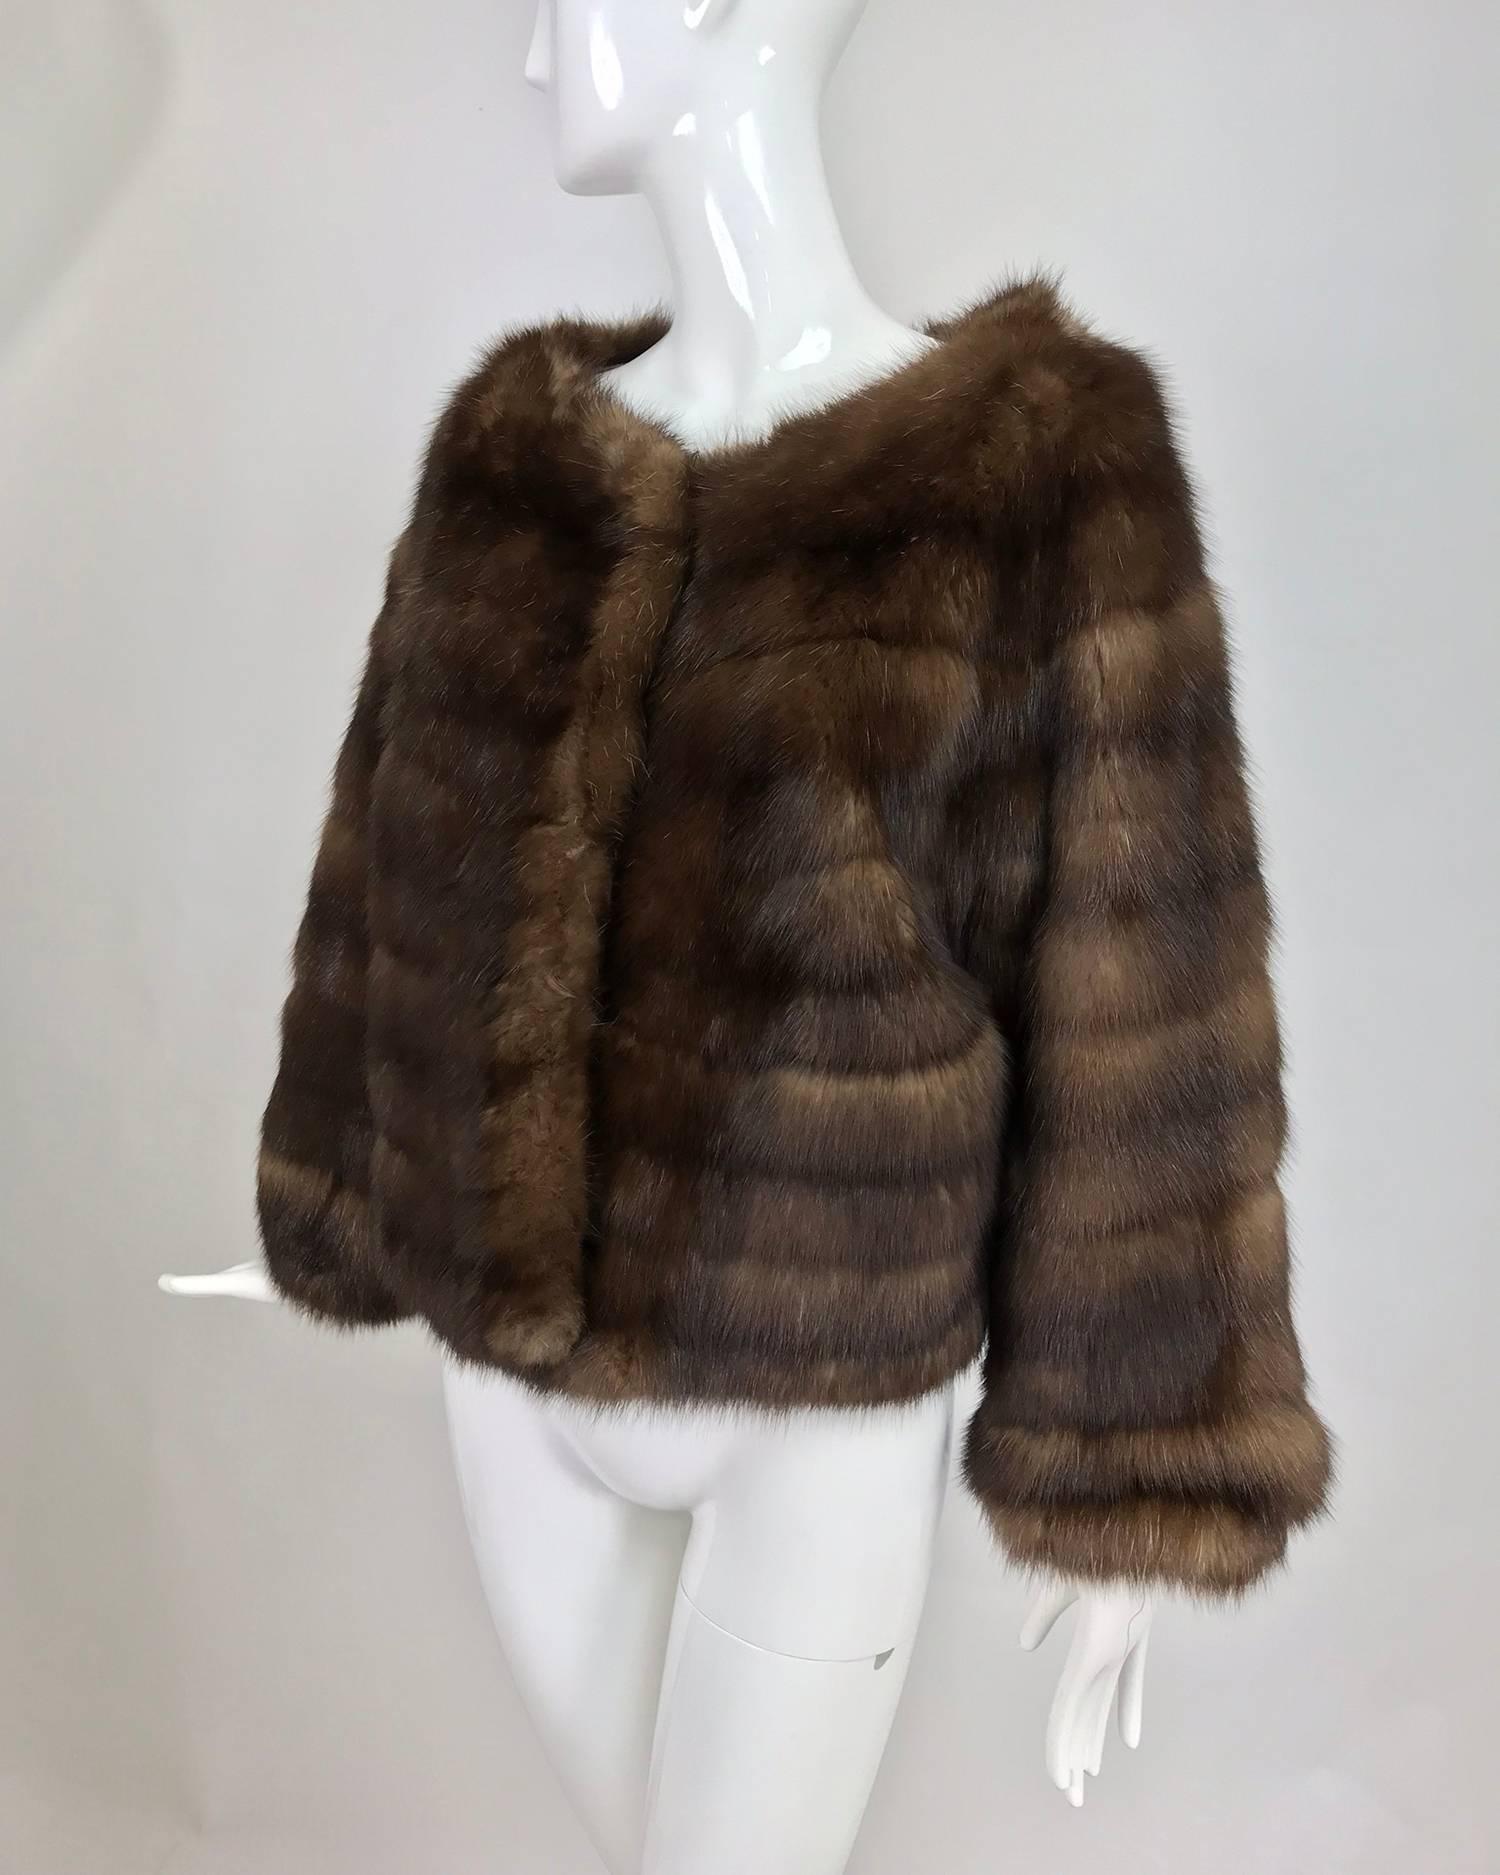 Natrural sable jacket from S J Glaser furs New York 1960s...This beautiful jacket is hip length, depending on your height, see measurements below...Open neckline perfect for turtle neck sweaters or amazing scarves...Long sleeves with gathered cuffs,